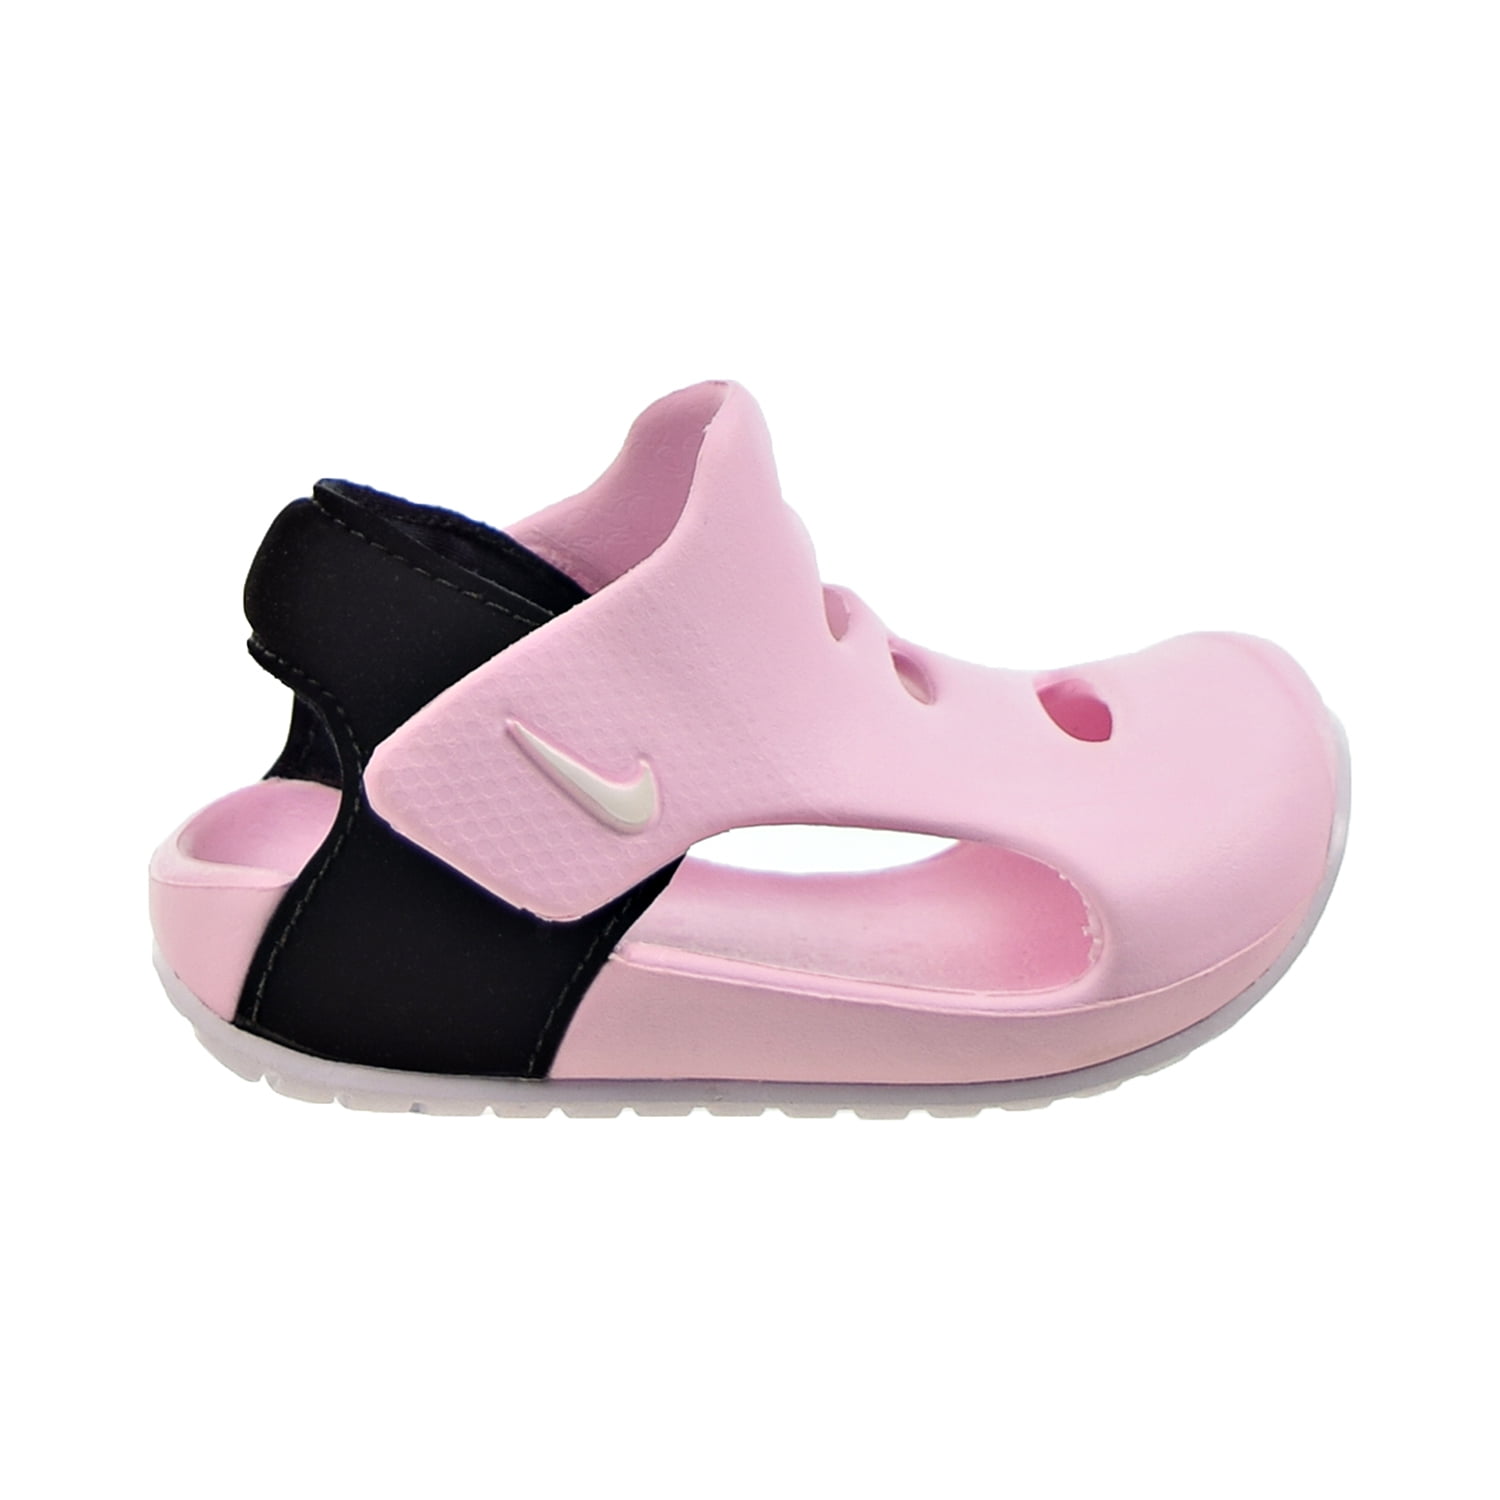 Sunray Protect 3 (TD) Toddler's Sandals Pink Foam-Black-White dh9465-601 - Walmart.com